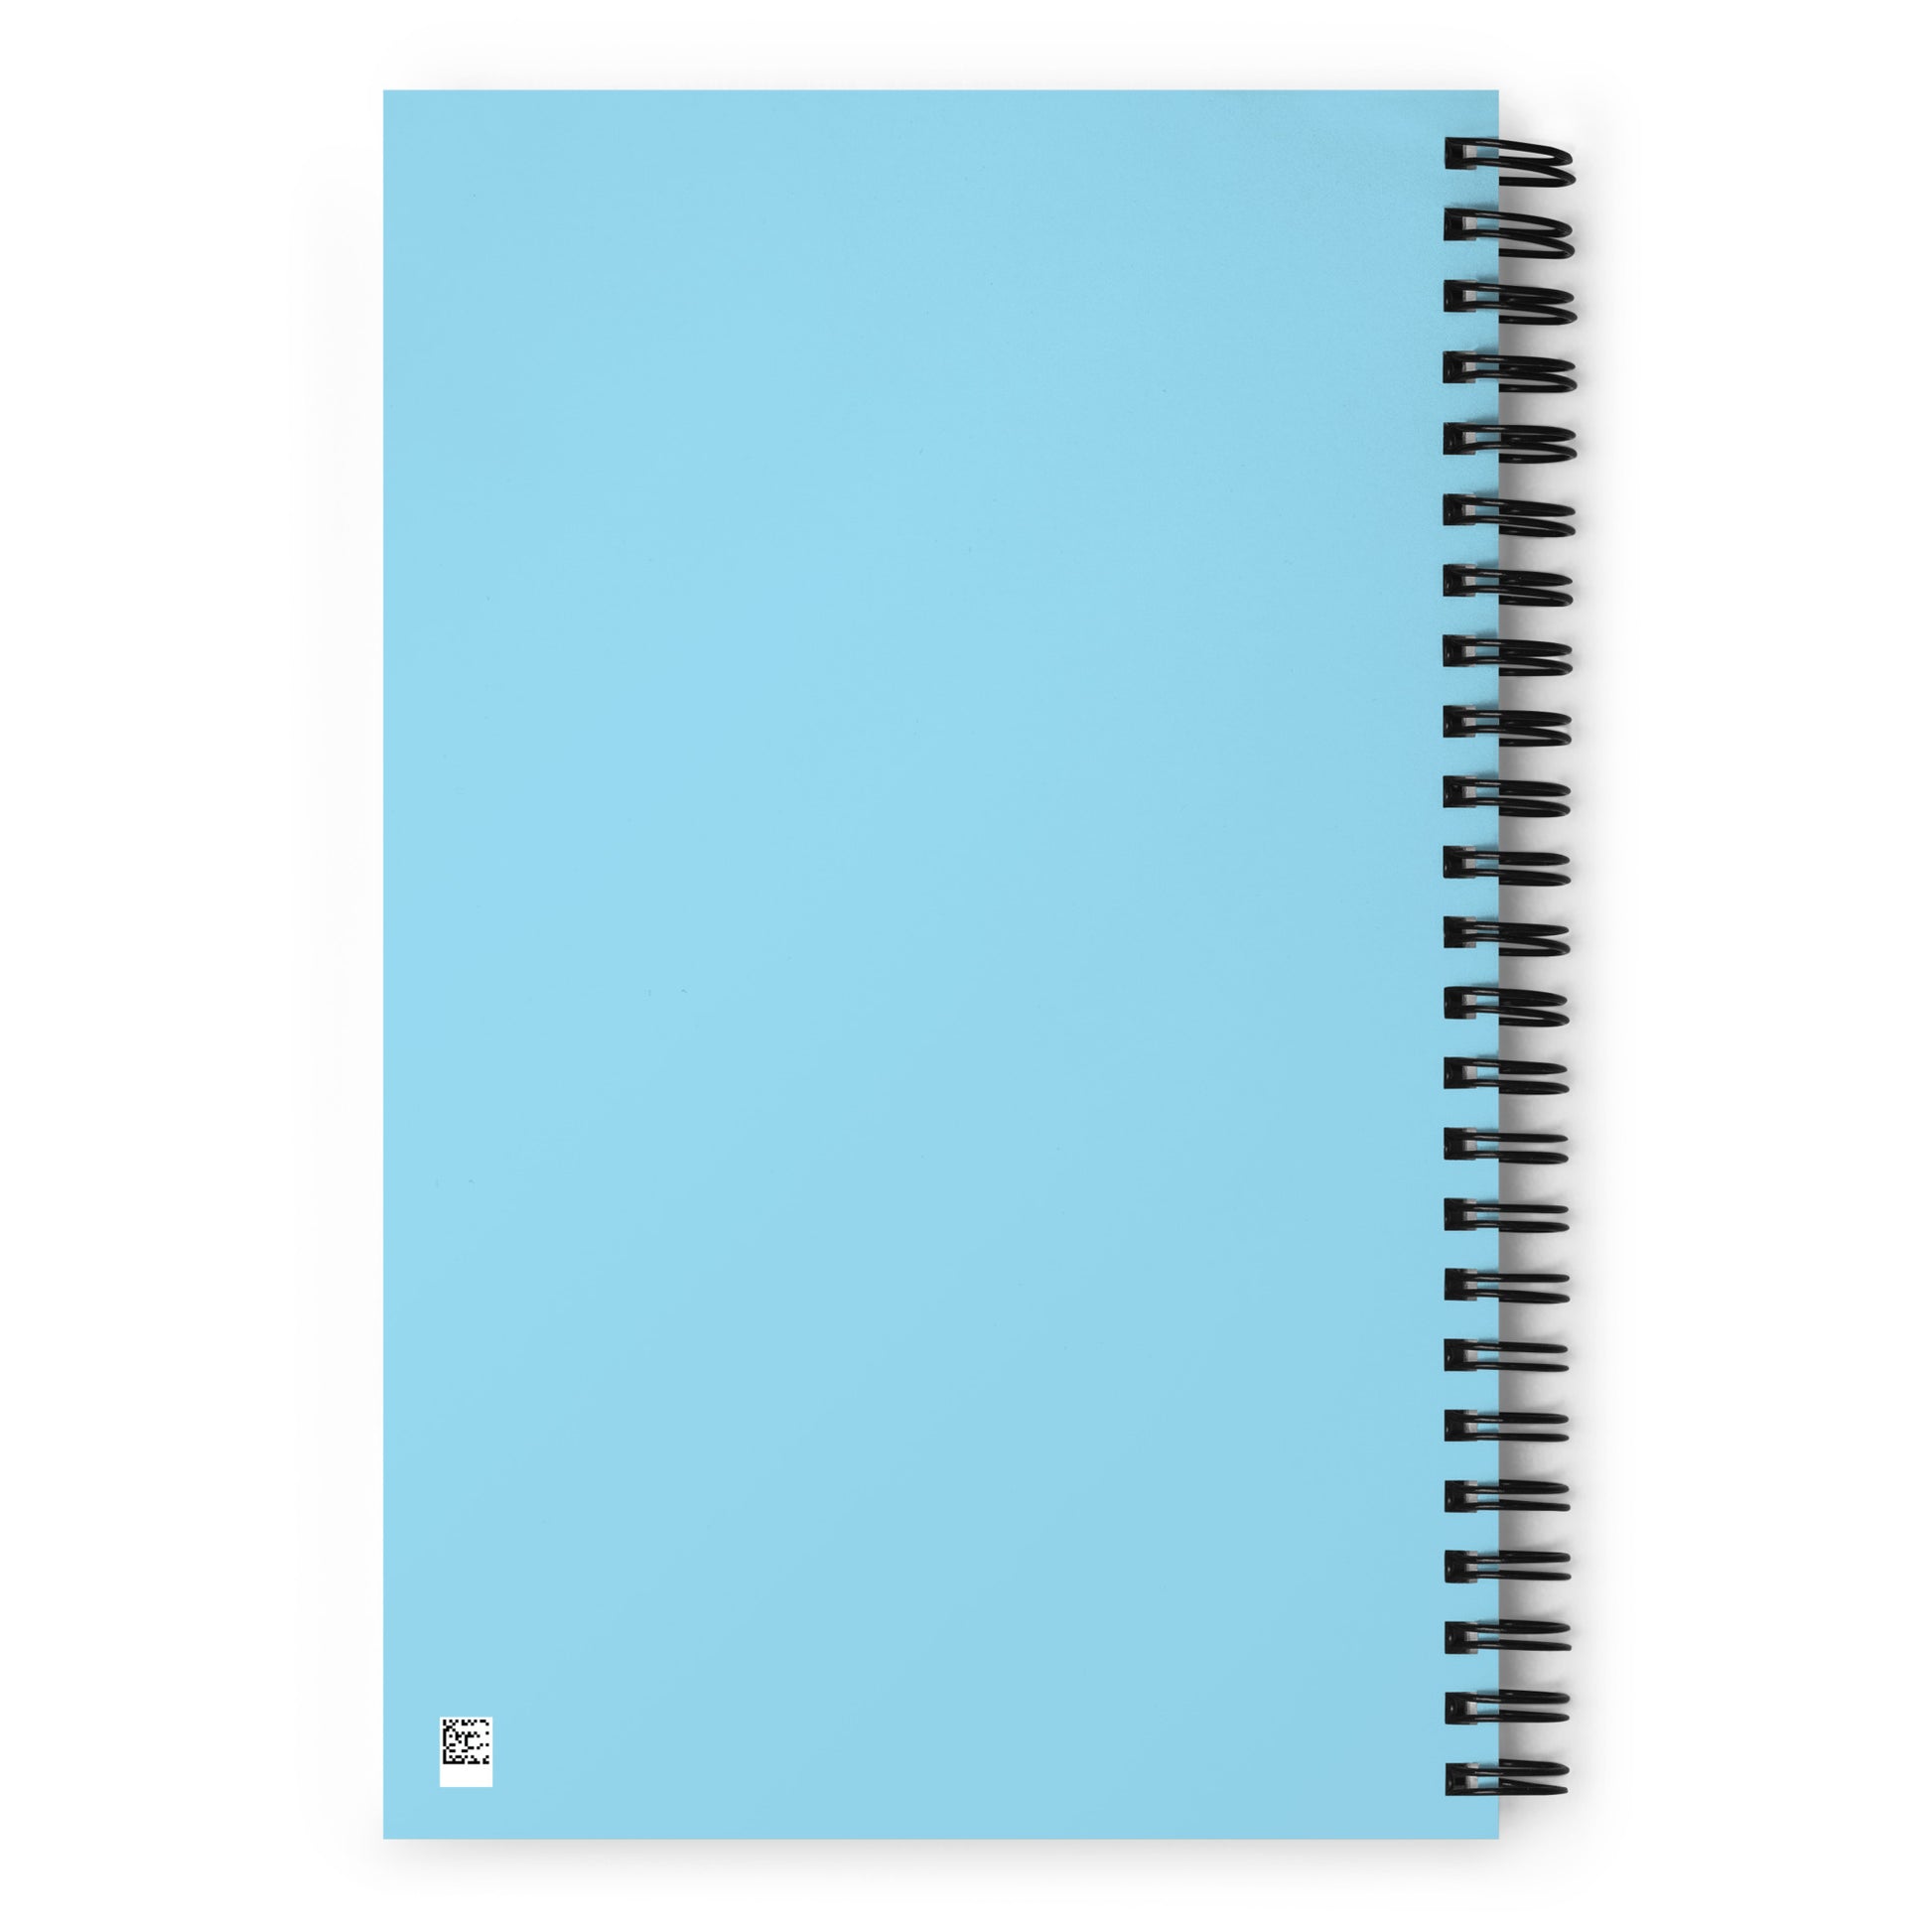 The back side of a light blue o-ring bound notebook.